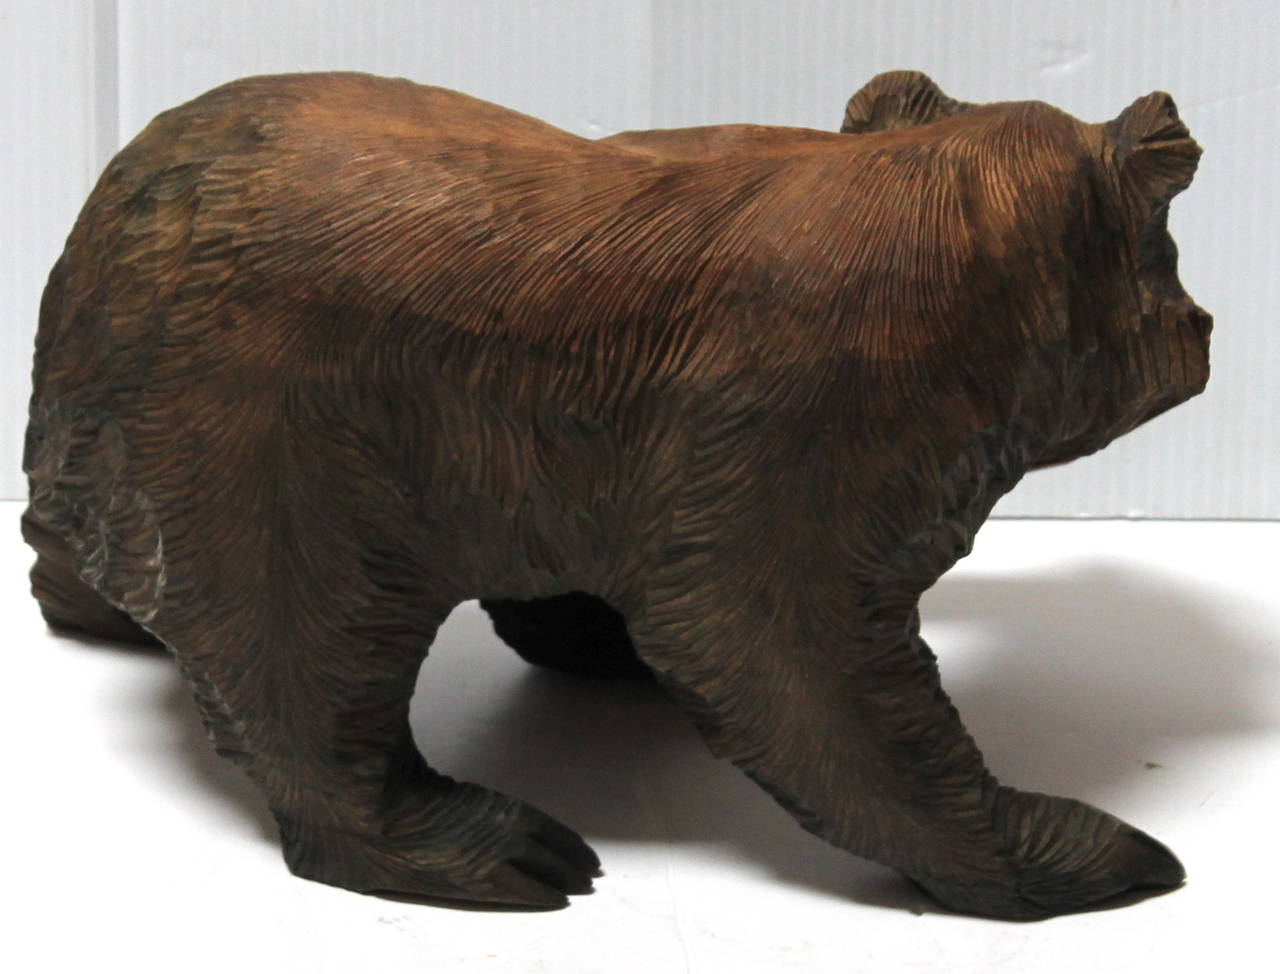 bear with fish in mouth statue meaning